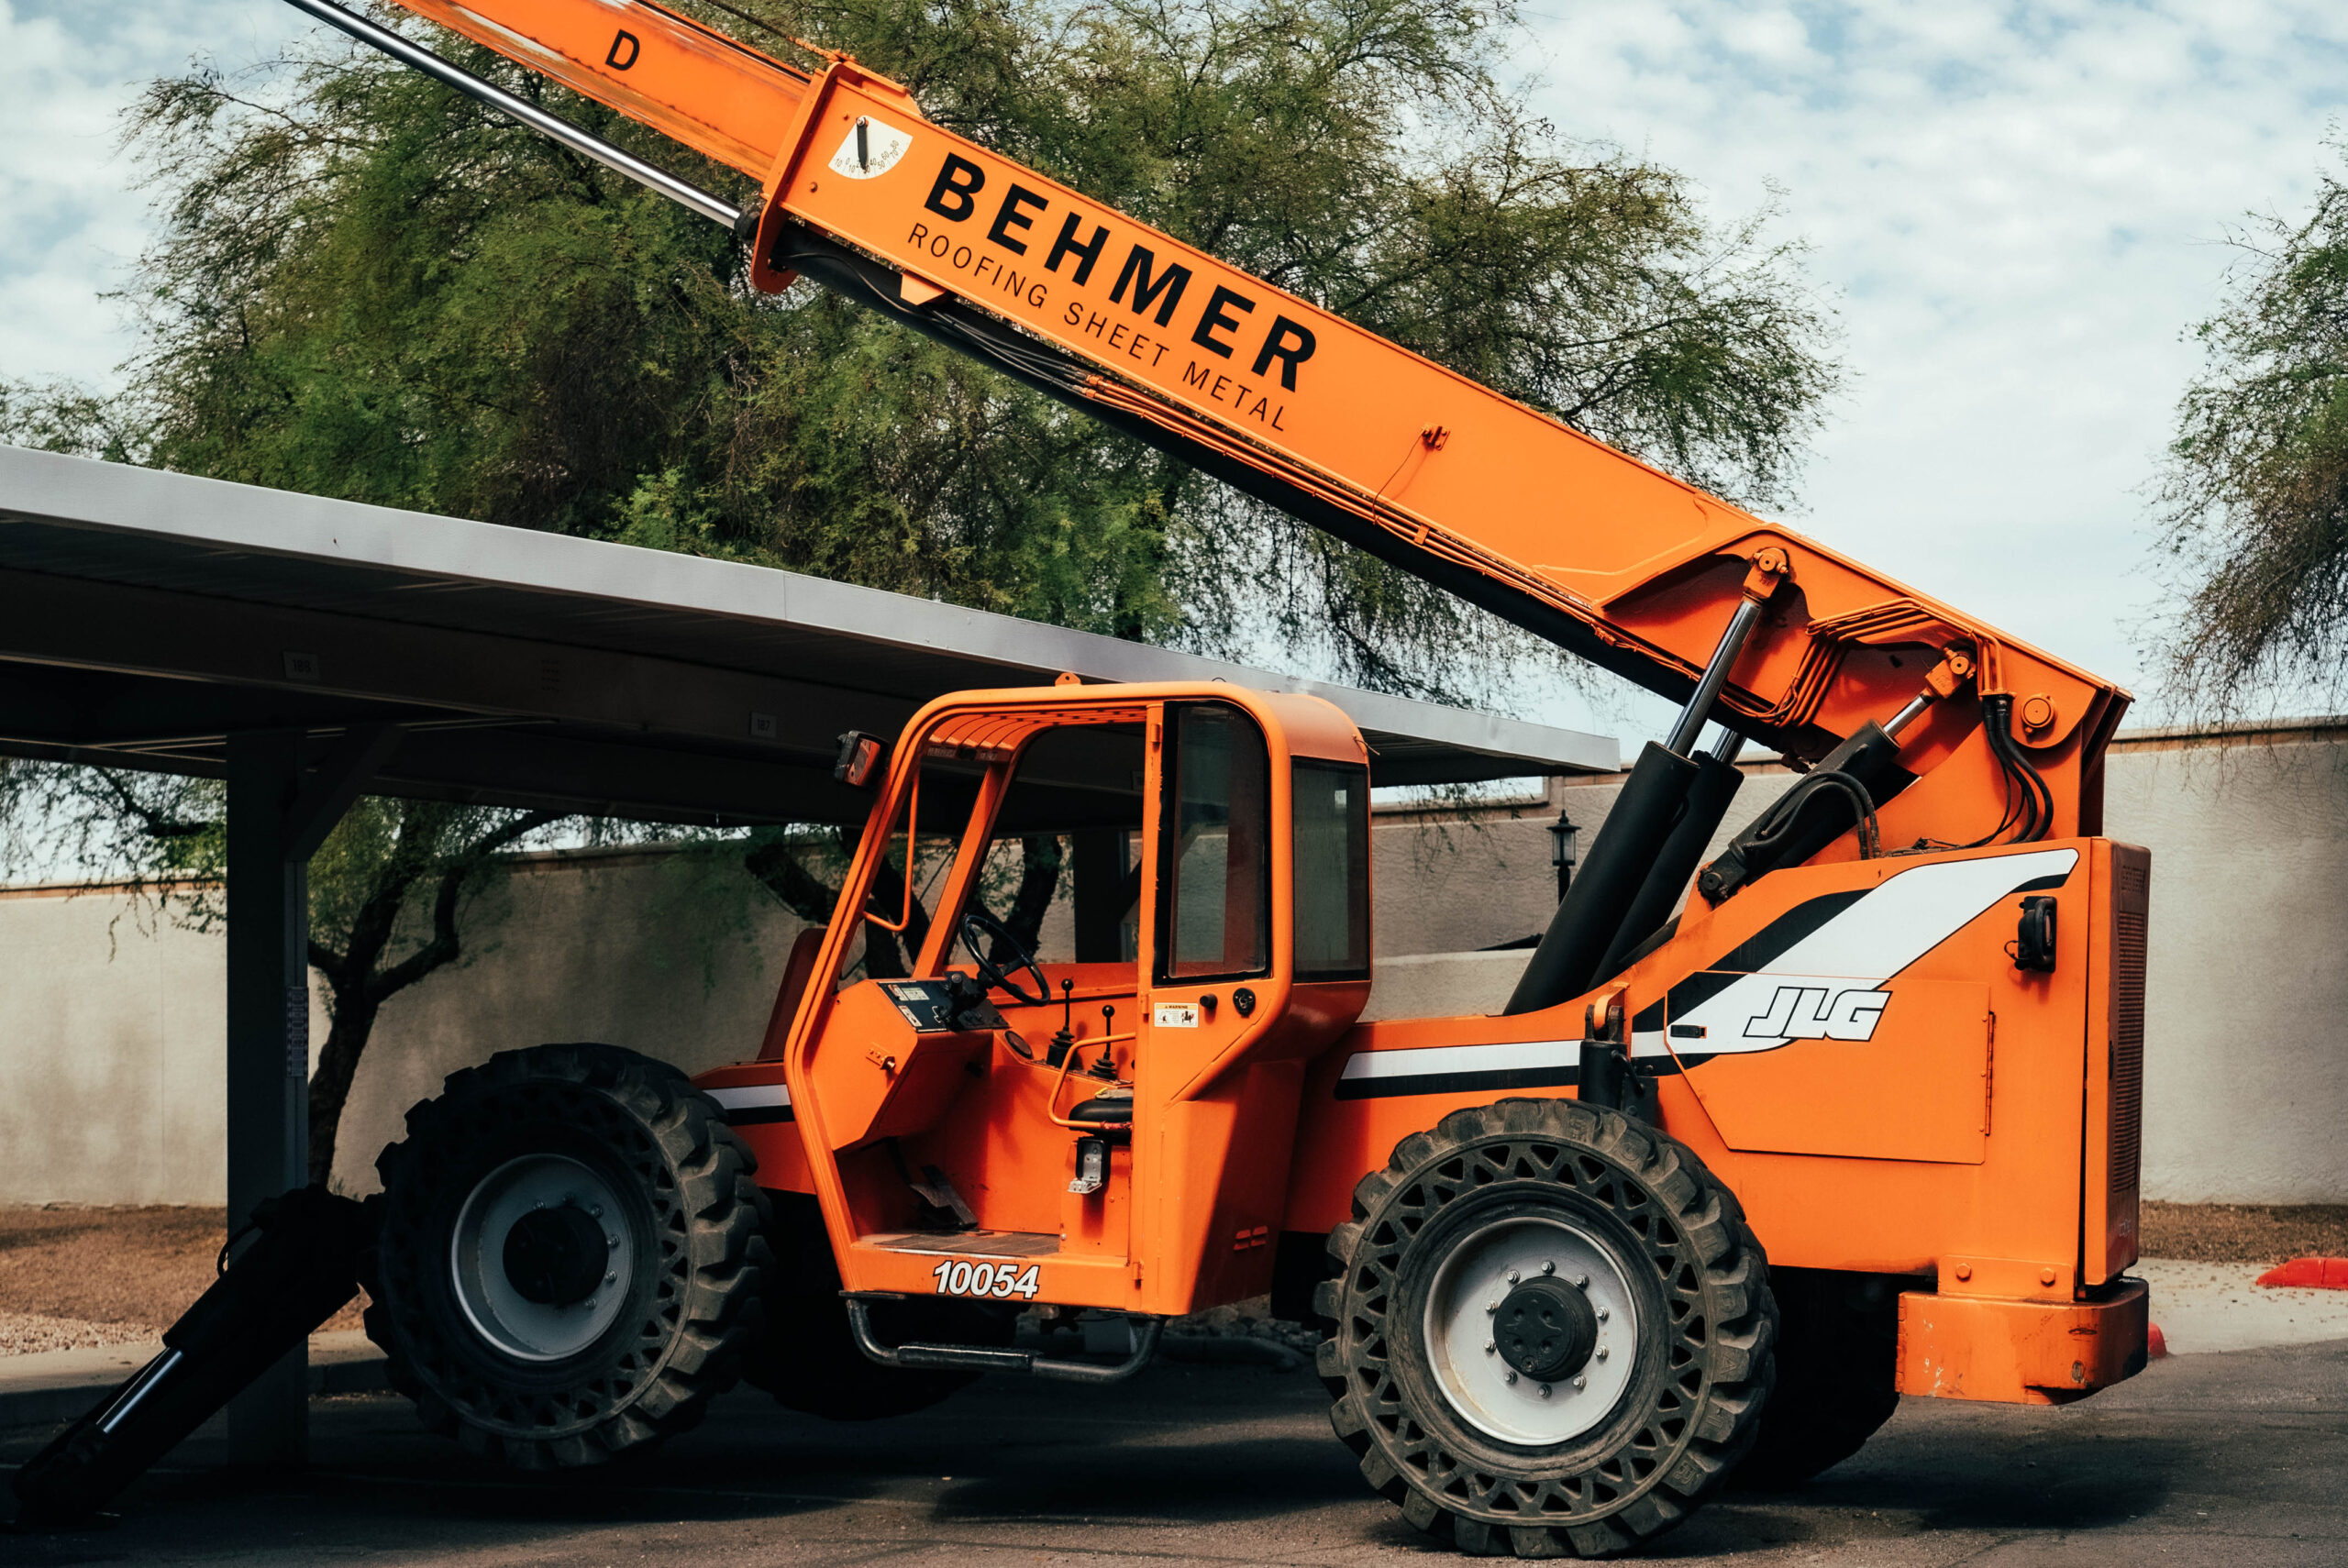 Behmer roofing crane at a McCormick Ranch site, symbol of quality and trust.